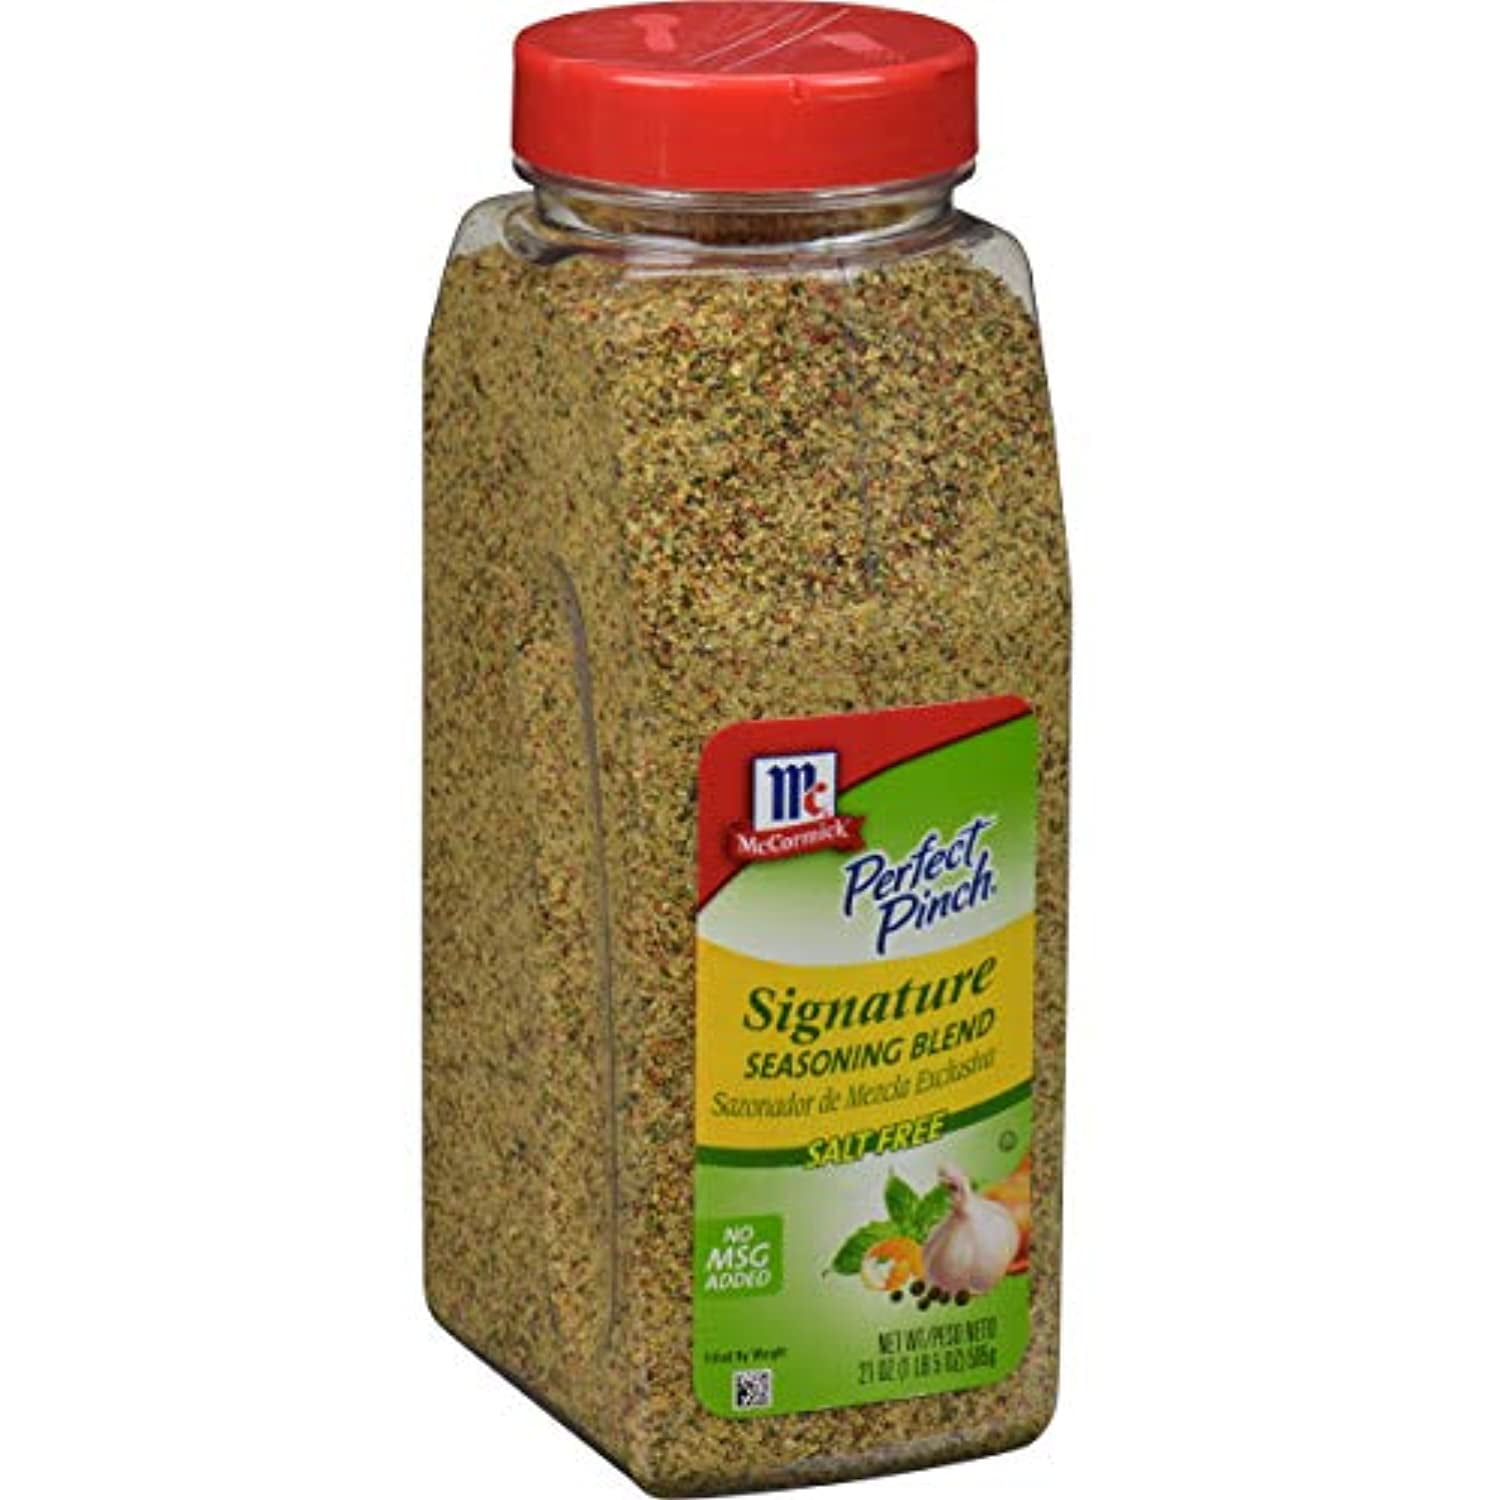  McCormick Perfect Pinch Signature Seasoning Packets, 500 count  - 500 Count Packets of Signature Seasoning Blend Made With 14 All-Purpose  Herbs and Spices : Grocery & Gourmet Food